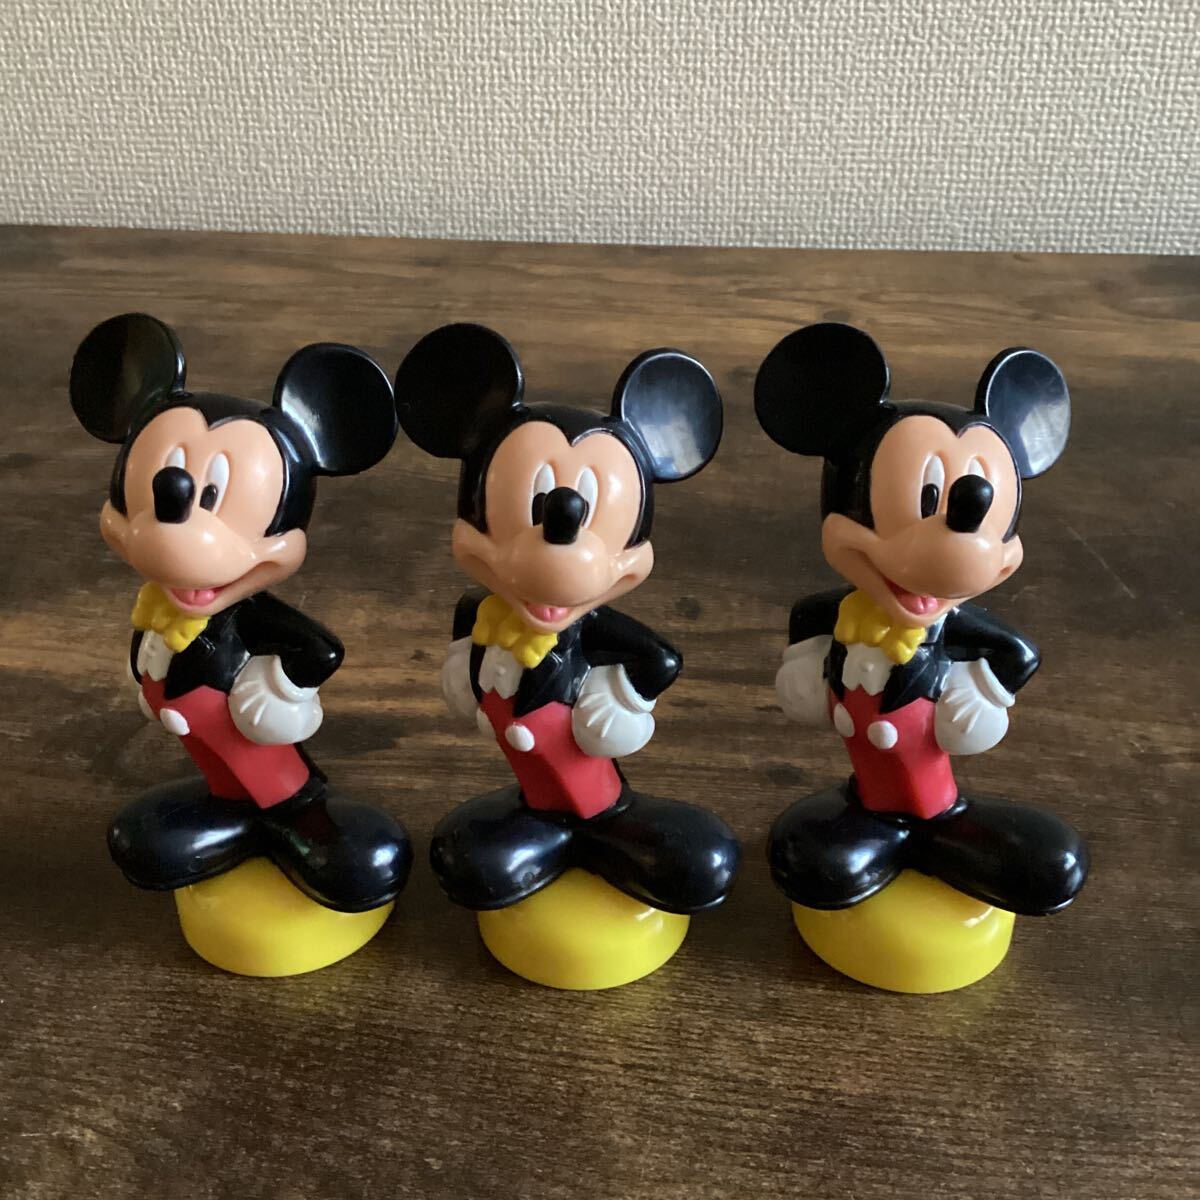 K1251) Disney Mickey figure set sale Mickey Mouse doll total length approximately 12cm ornament interior secondhand goods 